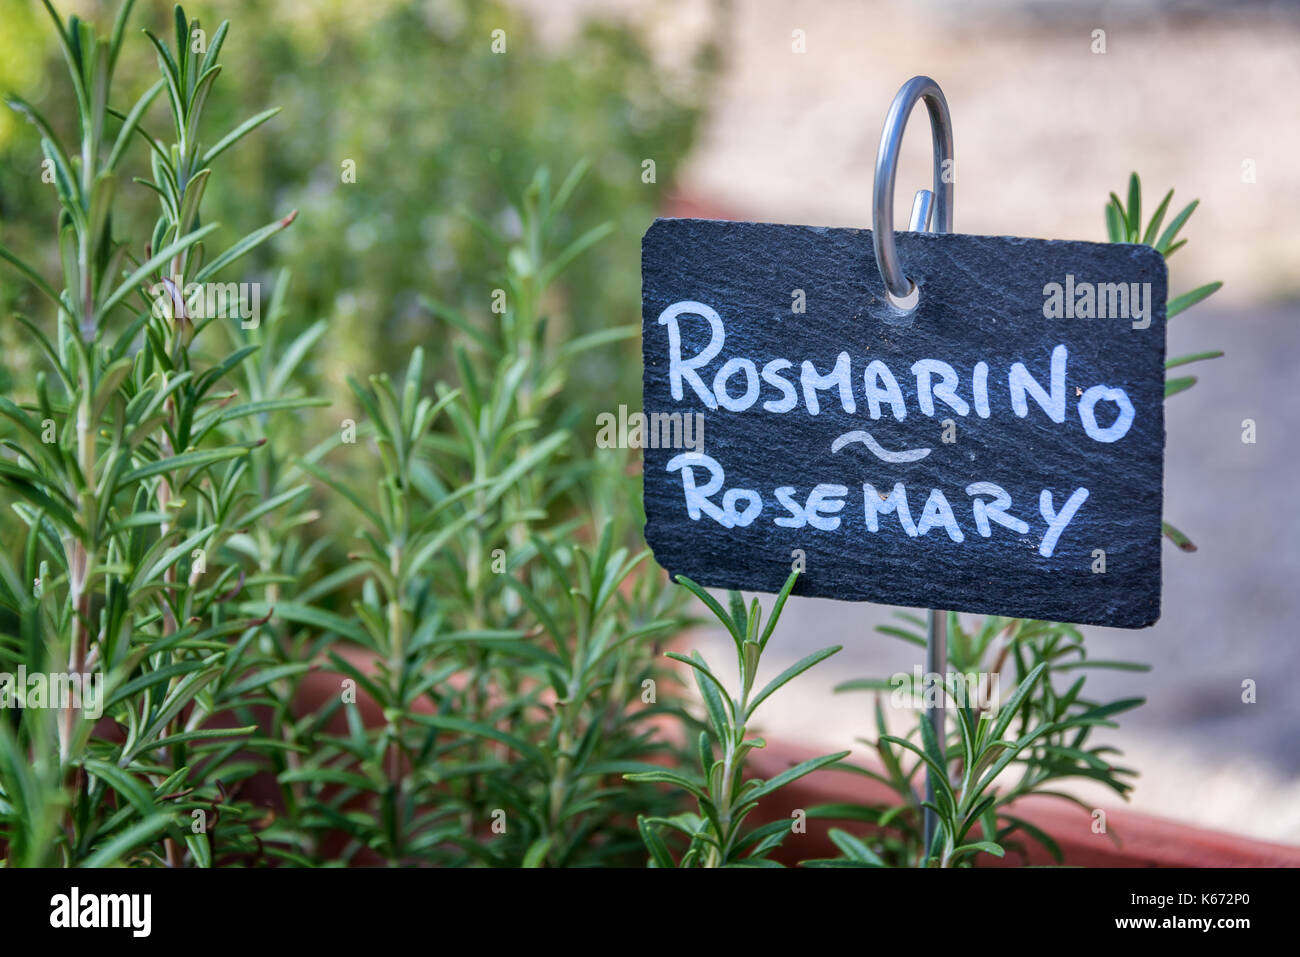 Rosemary growing in a garden, labelled in english and italian (rosmarino) Stock Photo